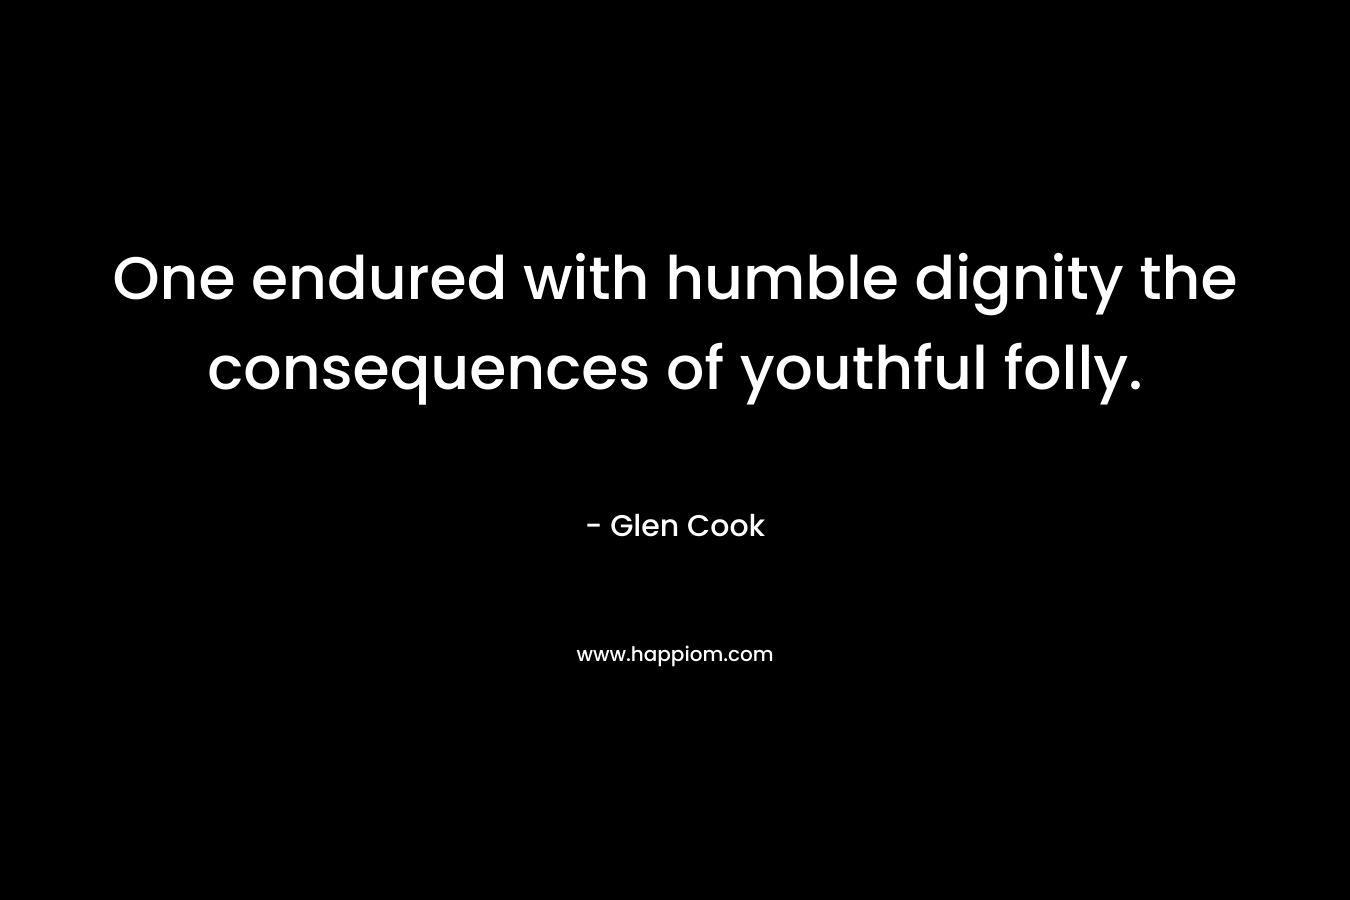 One endured with humble dignity the consequences of youthful folly. – Glen Cook